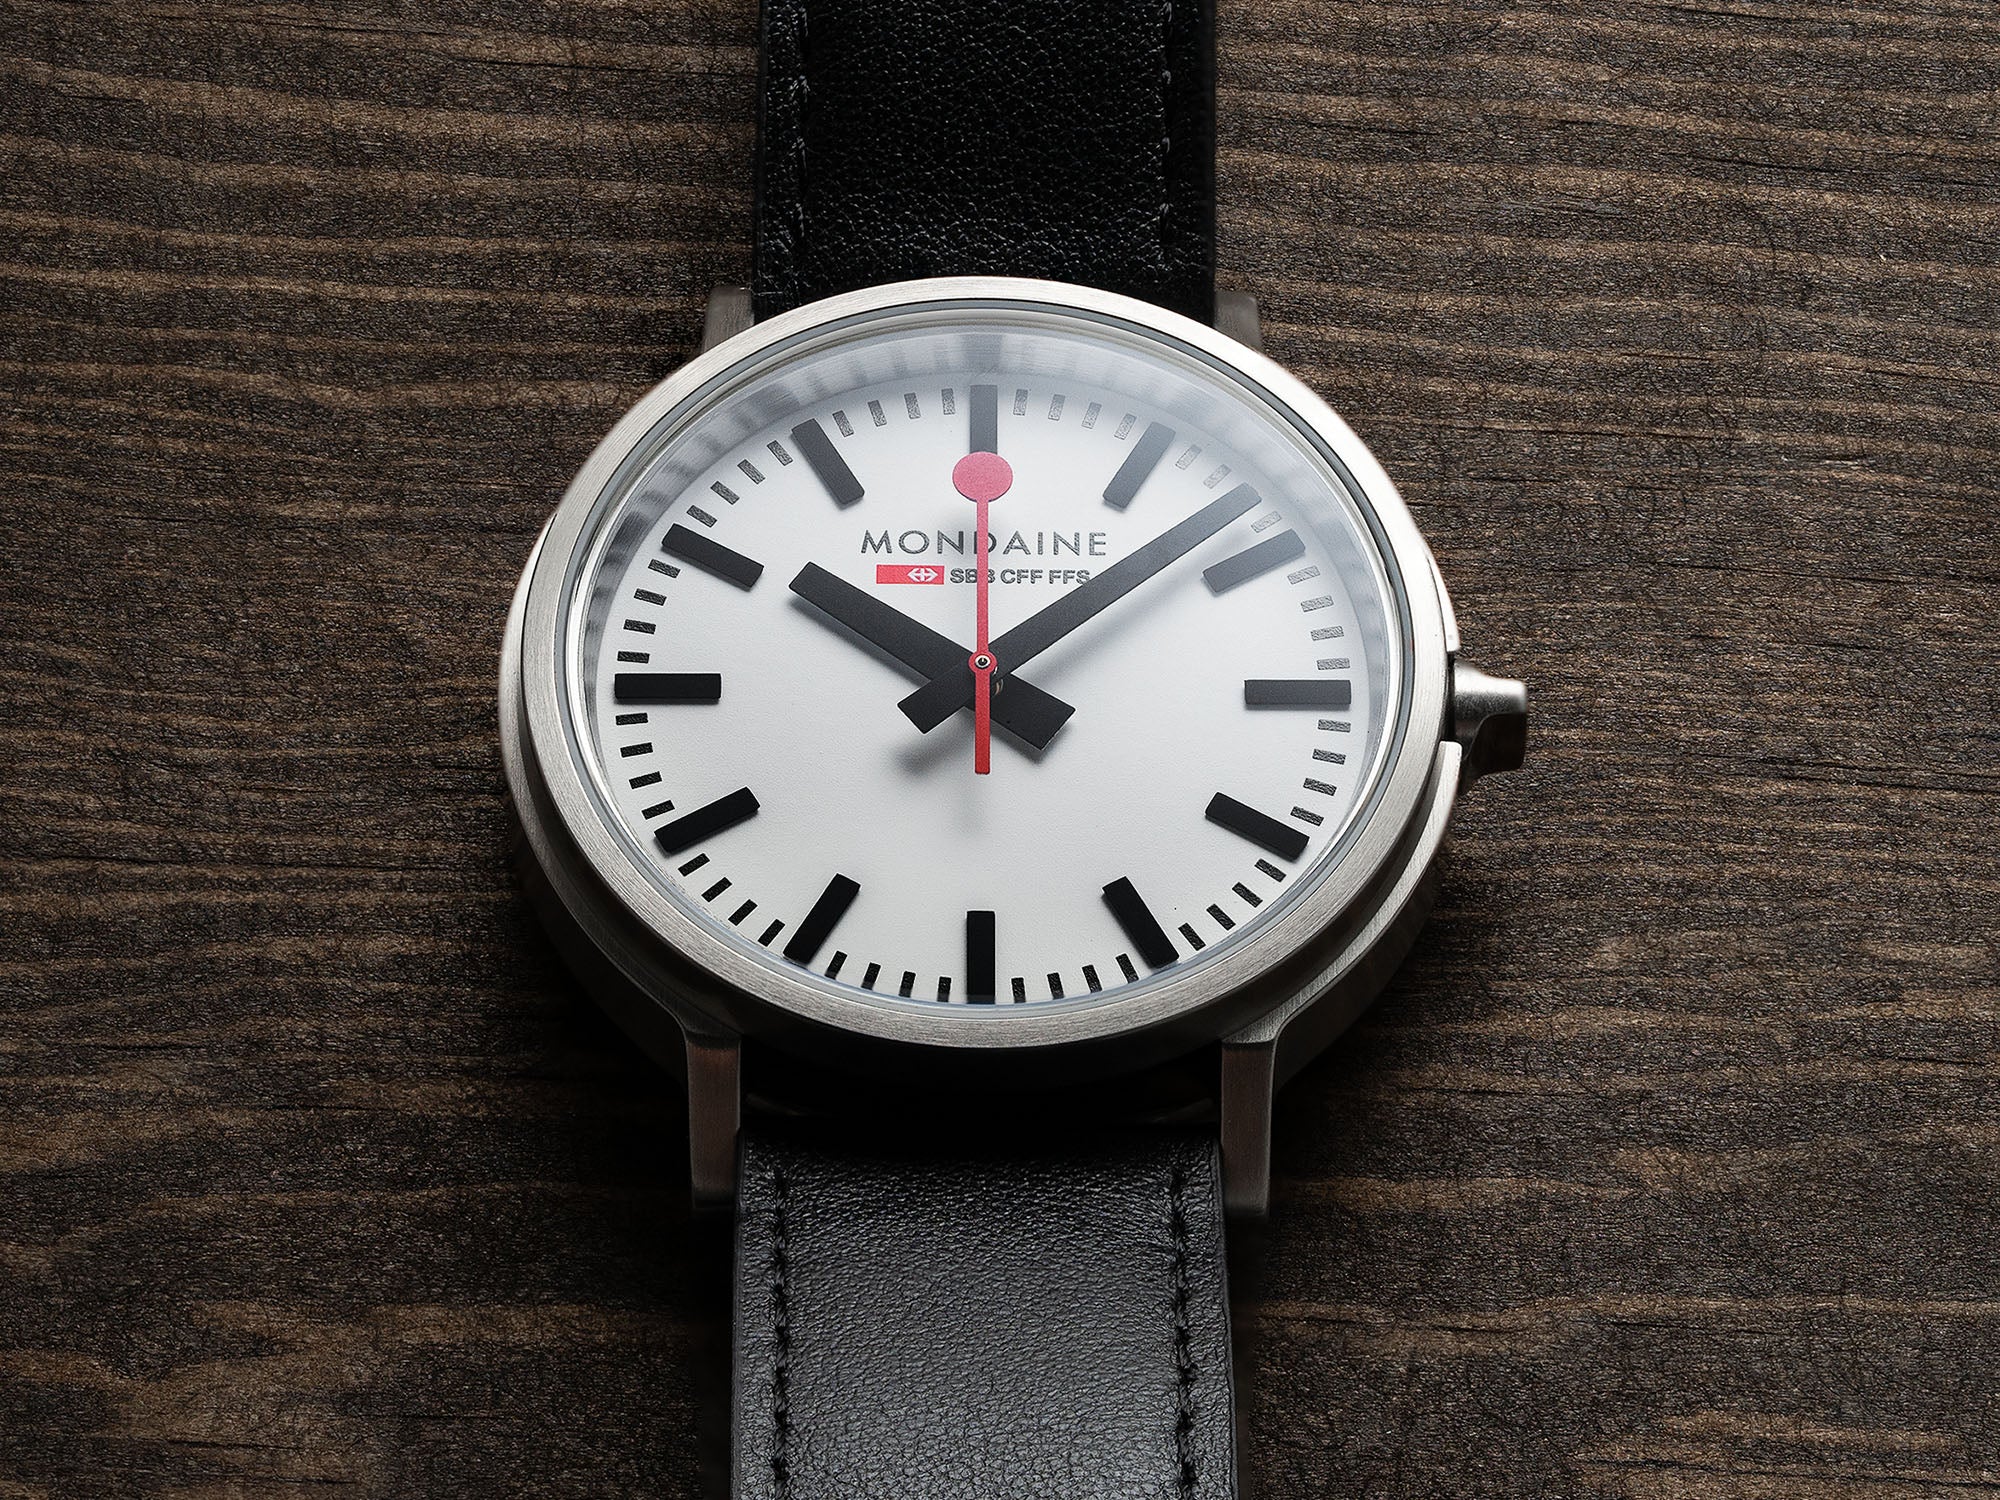 25 White-Dial Watches Suitable for Every Budget and Style